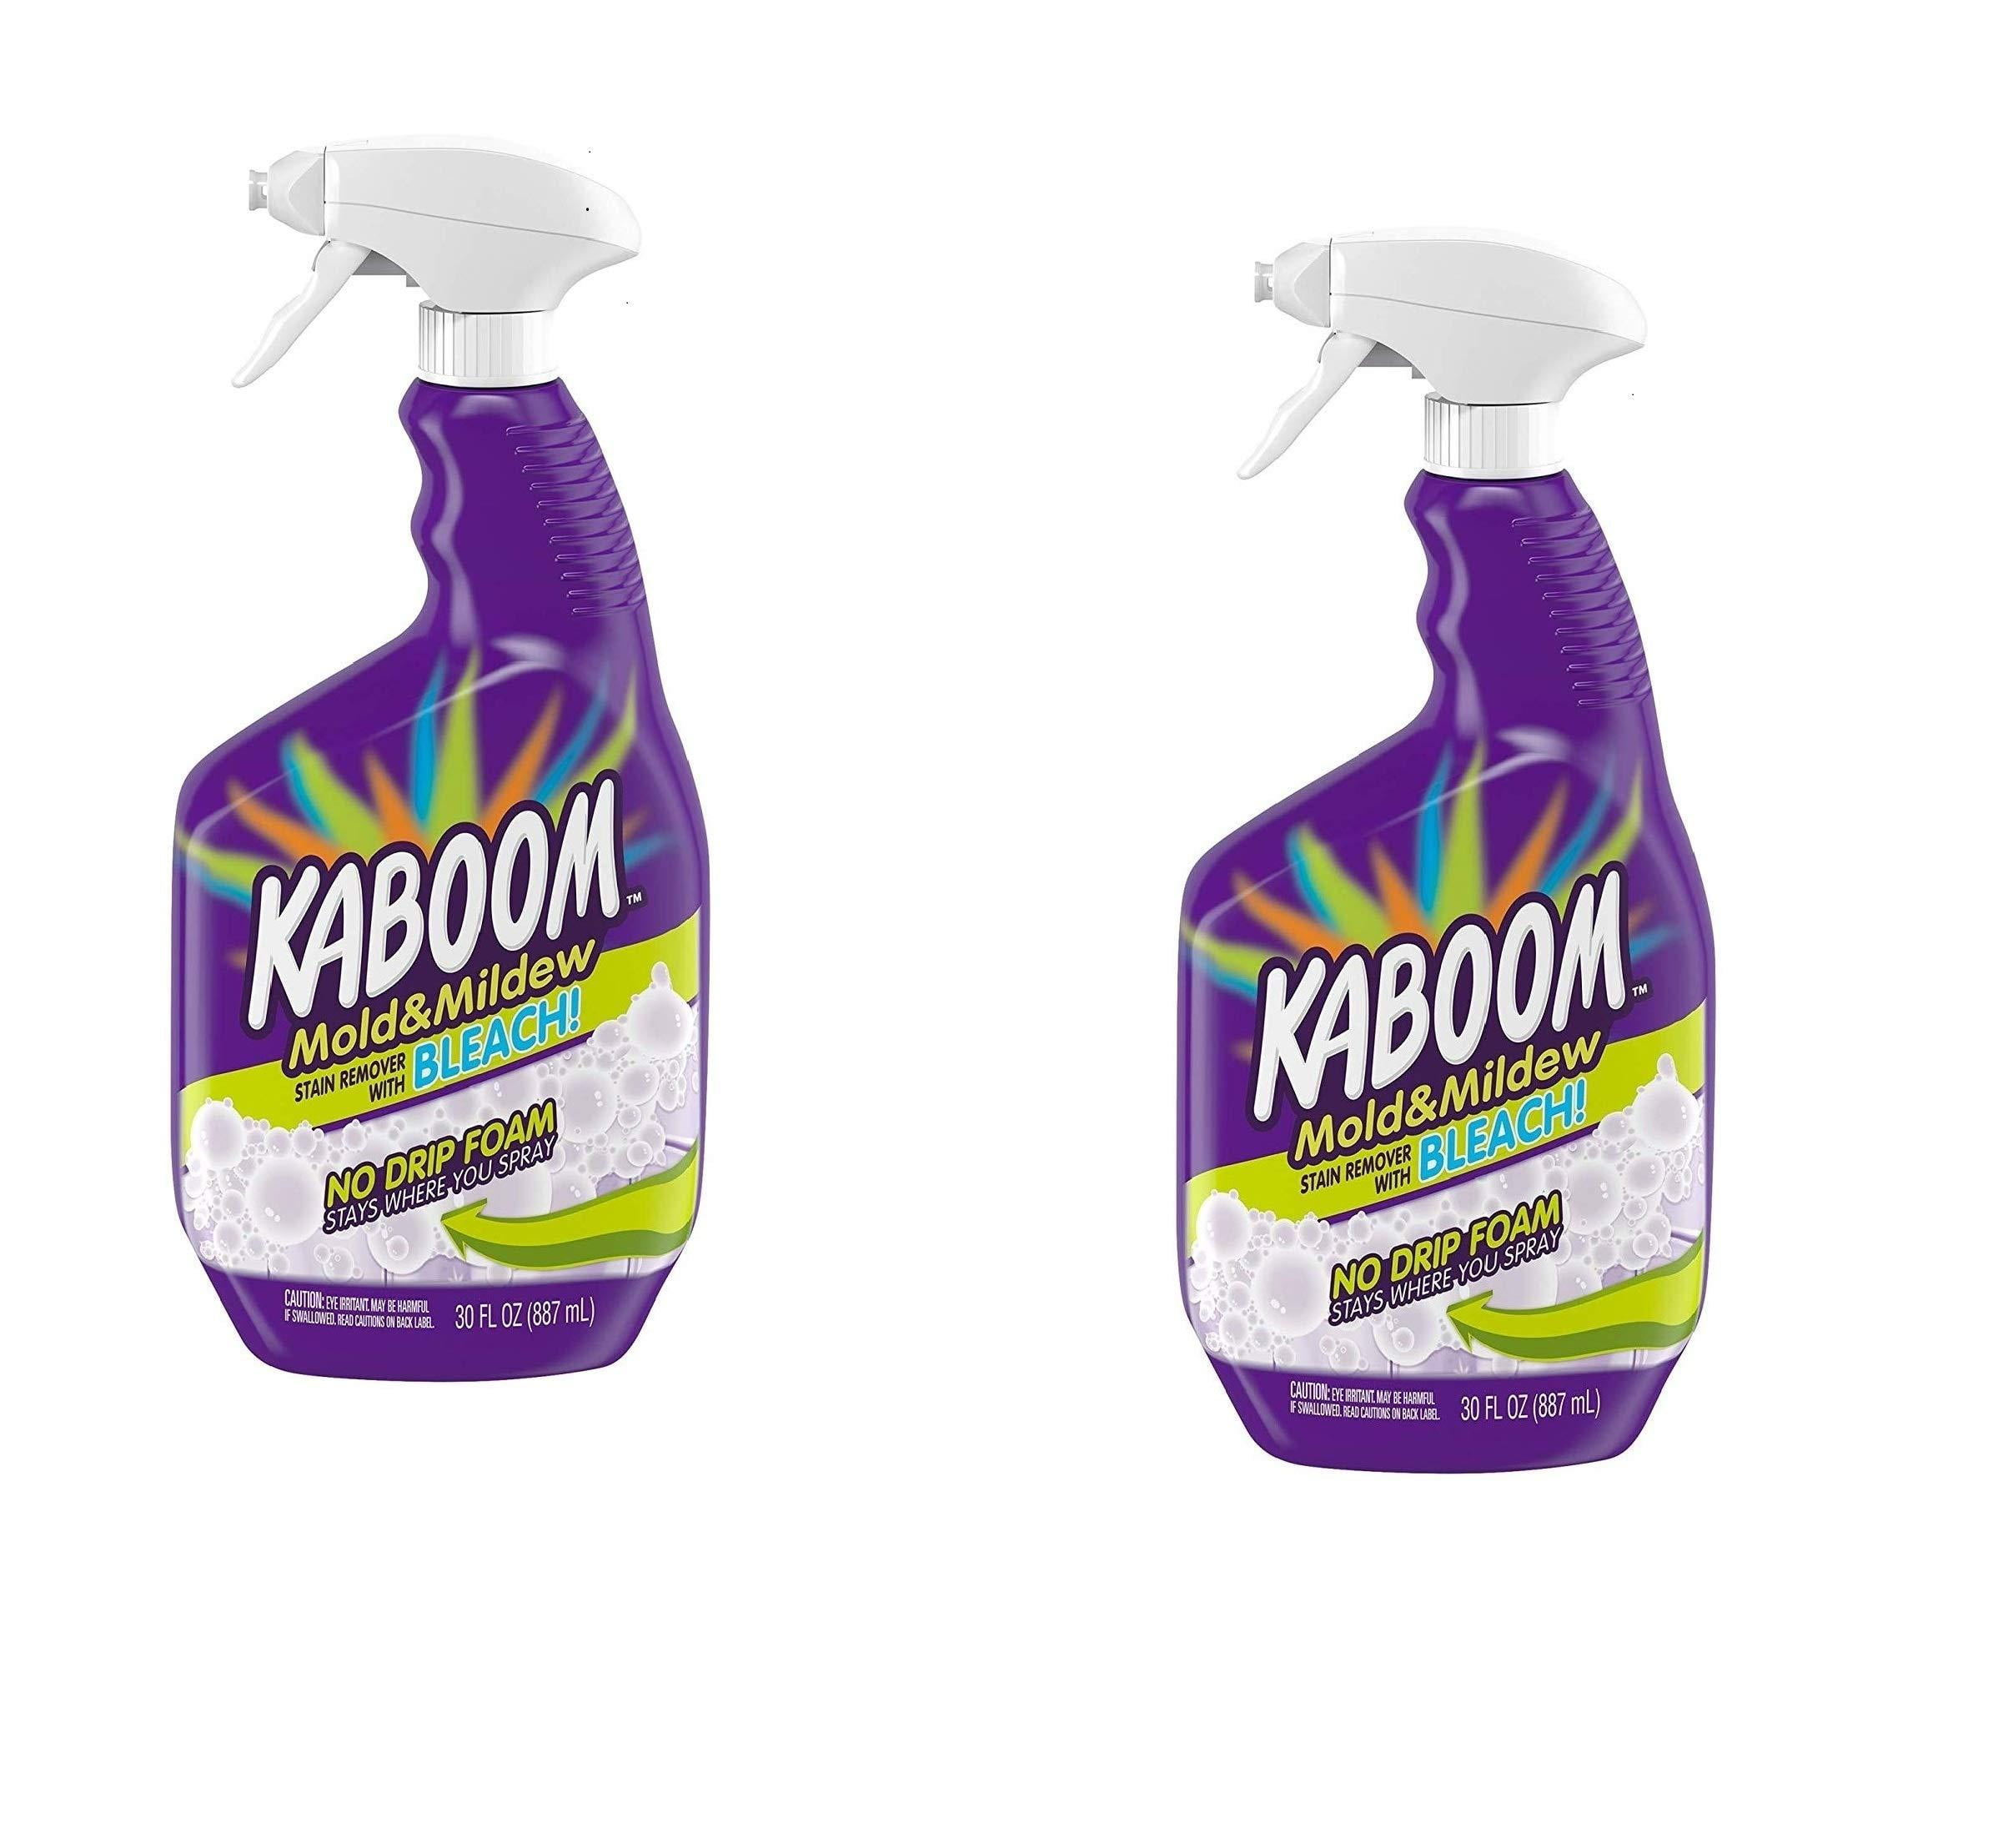 Kaboom No Drip Foam Mold And Mildew Stain Remover With Bleach 30 Fl Oz Spray Bottle Pack Of 2 0918